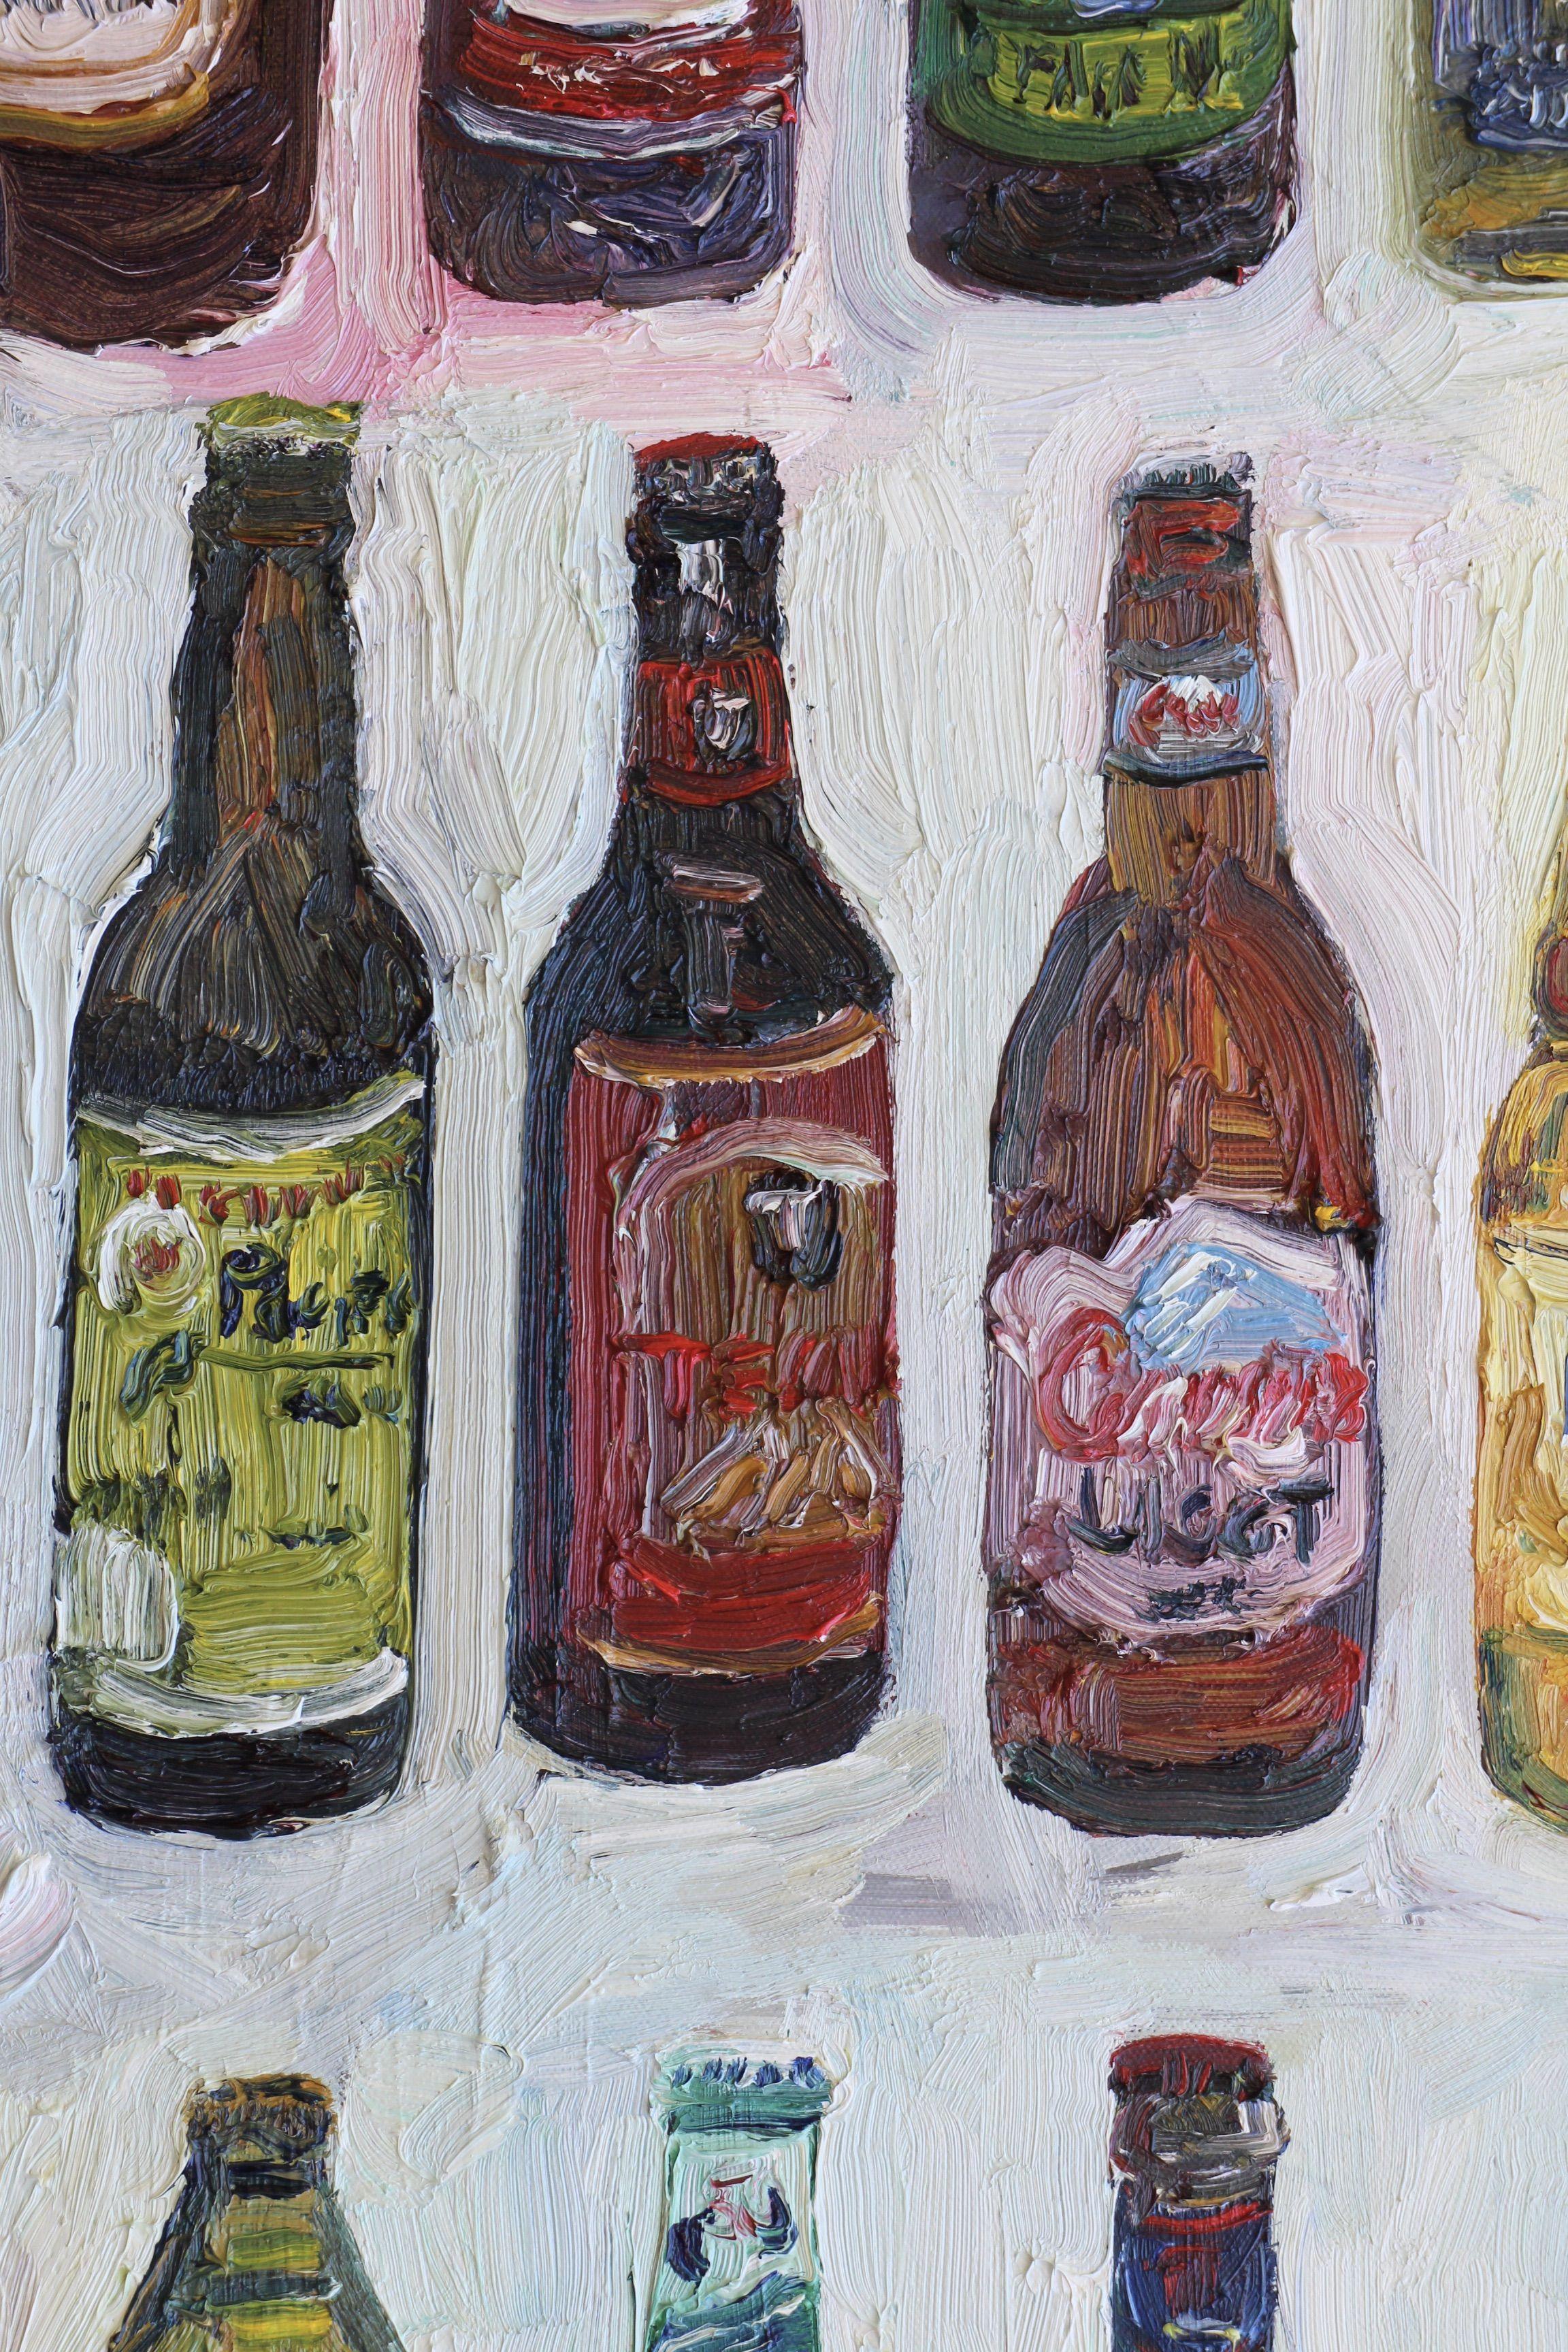 99 bottles of beer on the wall, 99 bottles of beer... you take one down, pass it around.... 98 bottles of beer on the wall.... 98 bottles of beer on the wall, etc, etc, etc.   :: Painting :: Contemporary :: This piece comes with an official